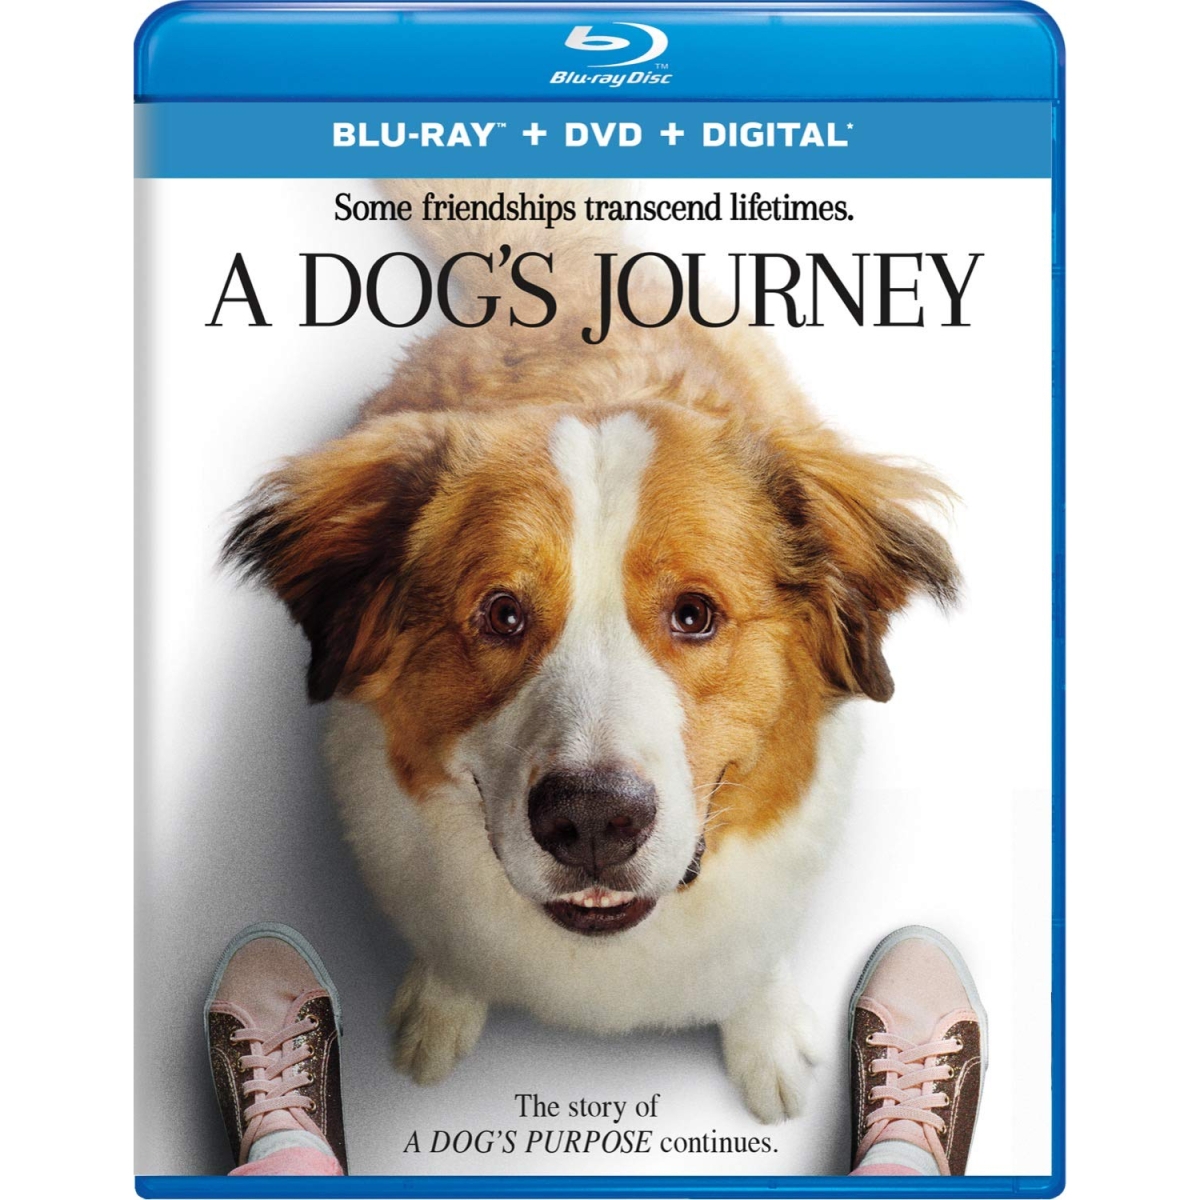 book a dog's journey